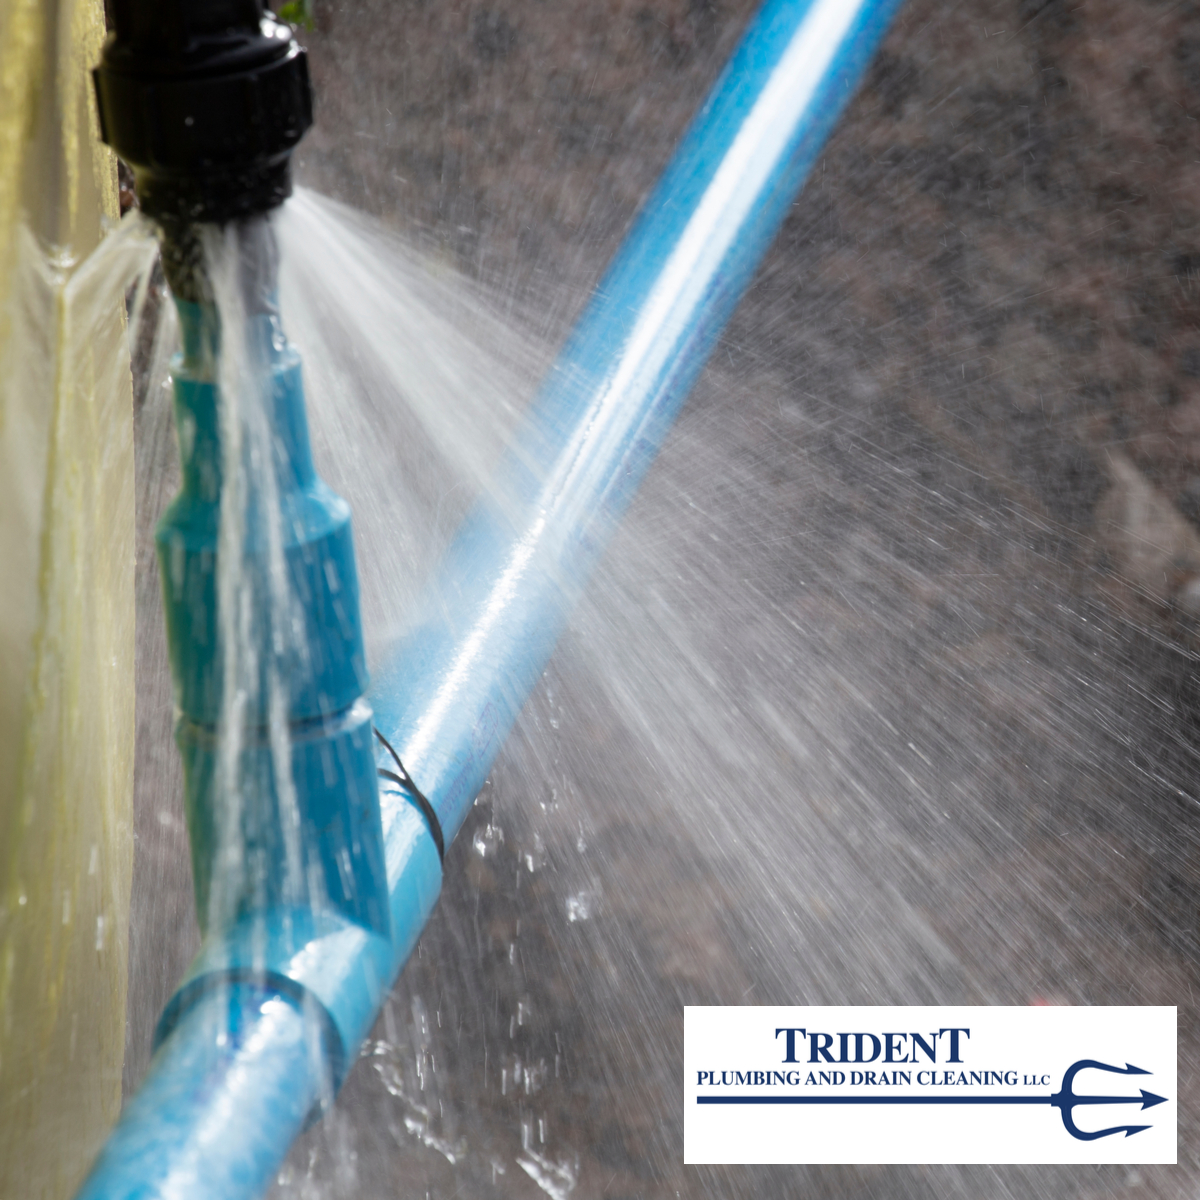 Do You Need To Repair Or Replace Your Granite Falls Water Line?